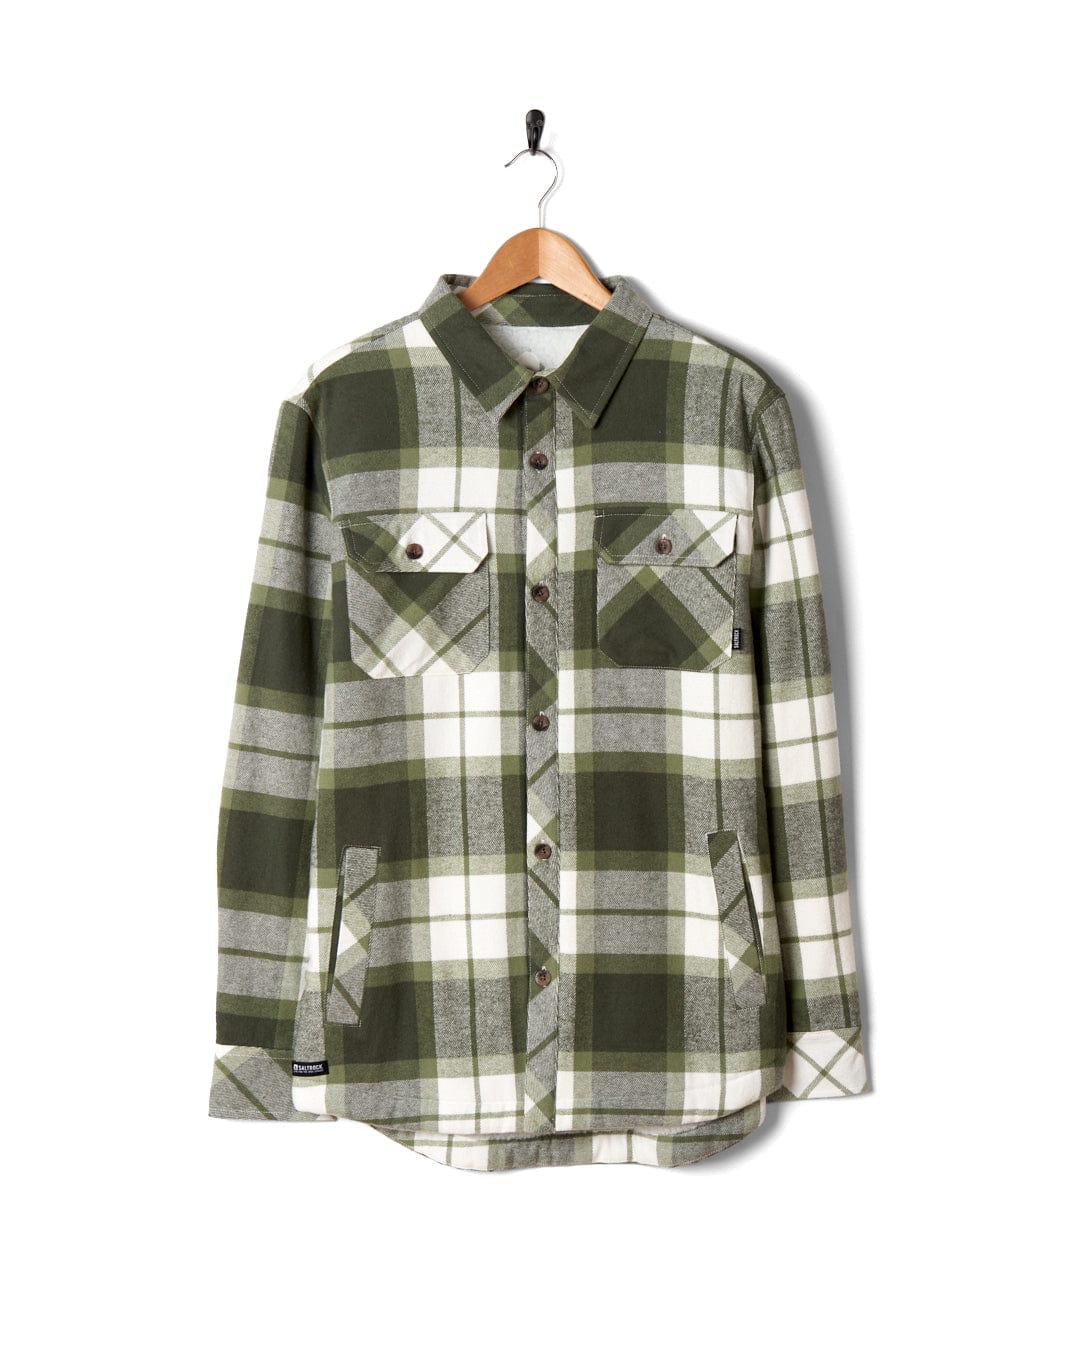 A Woody - Mens Borg Lined Shacket - Green Check shirt hanging on a hanger.